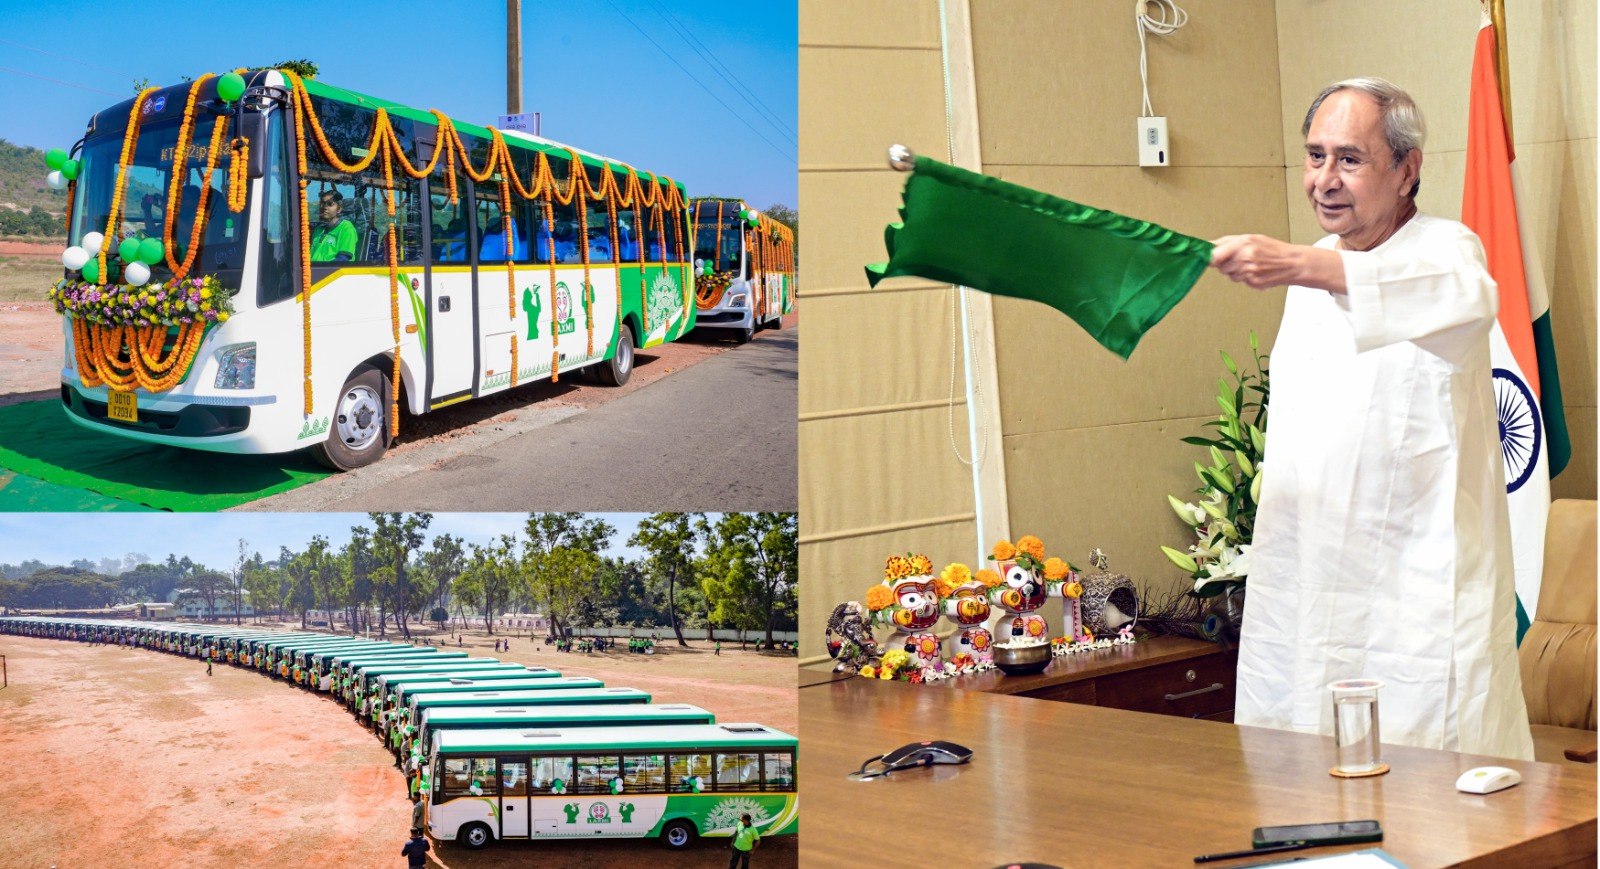 Odisha Chief Minister Naveen Patnaik launched ‘Location Accessible Multi-modal Initiative’ (LAccMI) bus service in Koraput district.